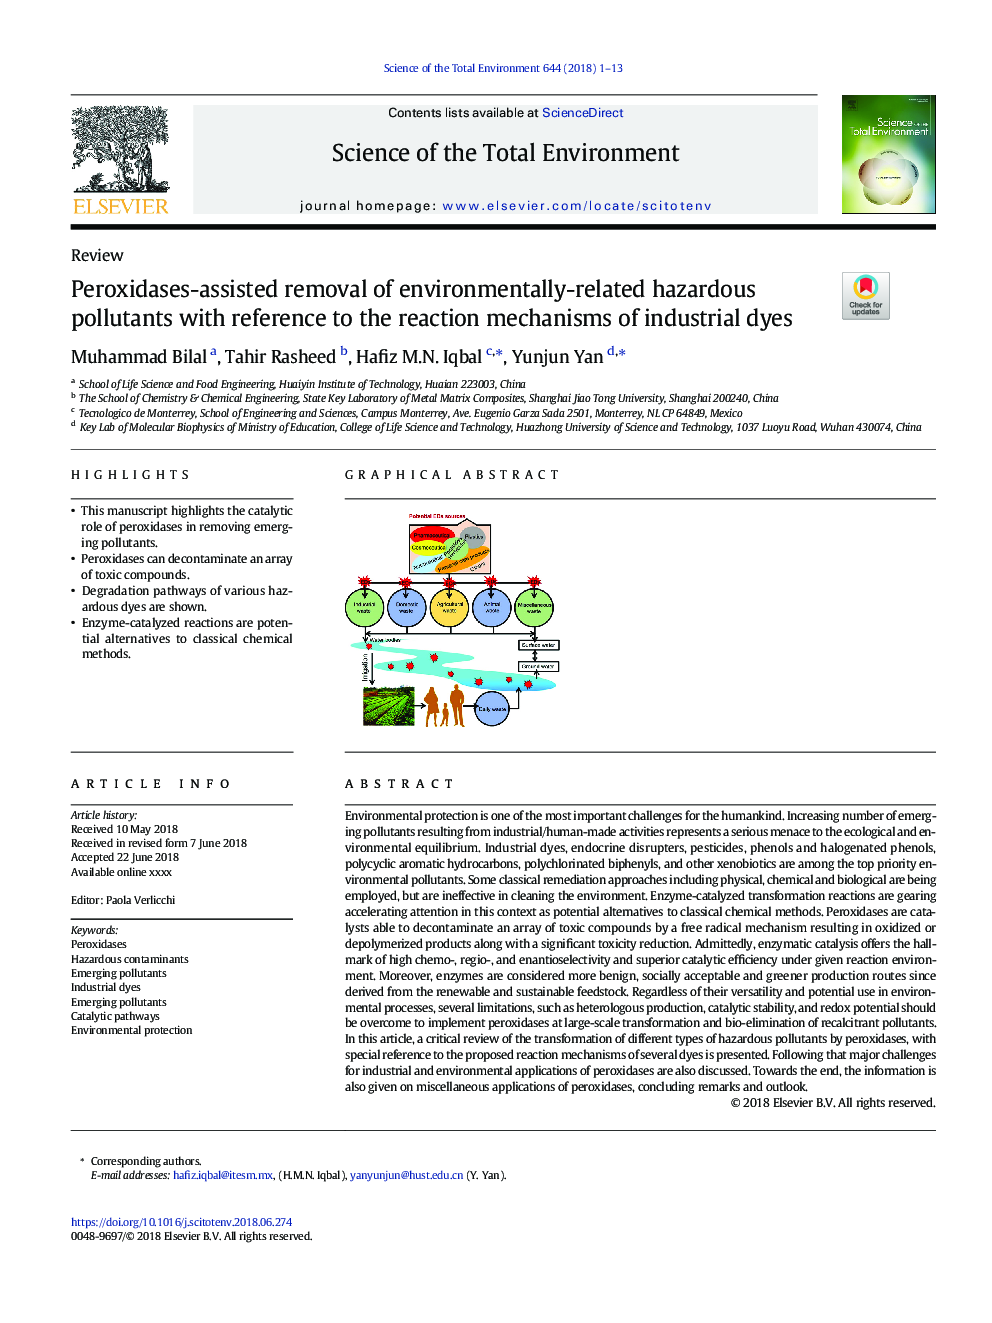 Peroxidases-assisted removal of environmentally-related hazardous pollutants with reference to the reaction mechanisms of industrial dyes